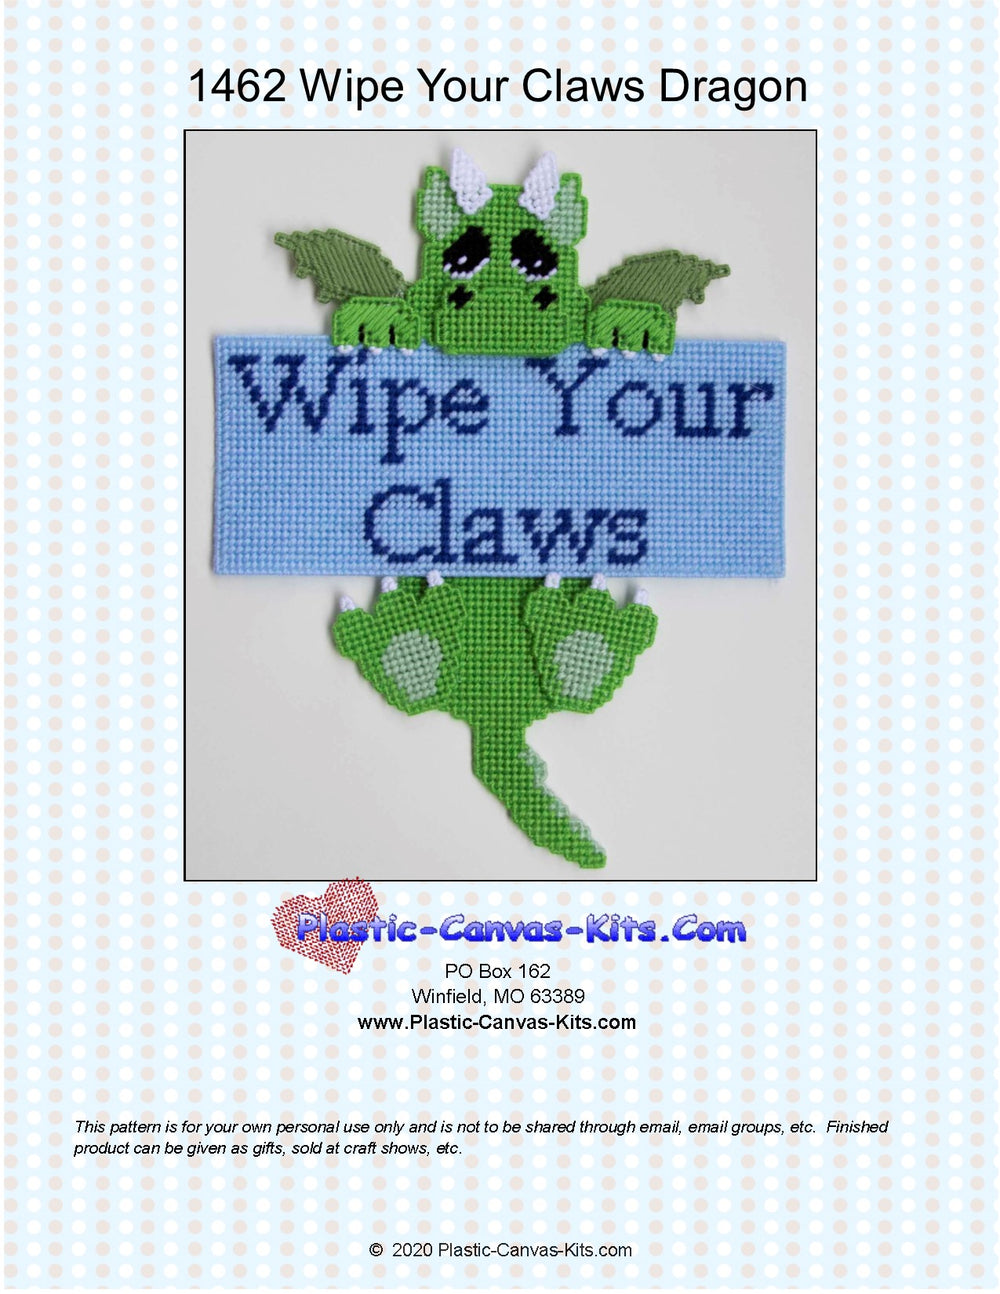 Dragon-Wipe Your Claws